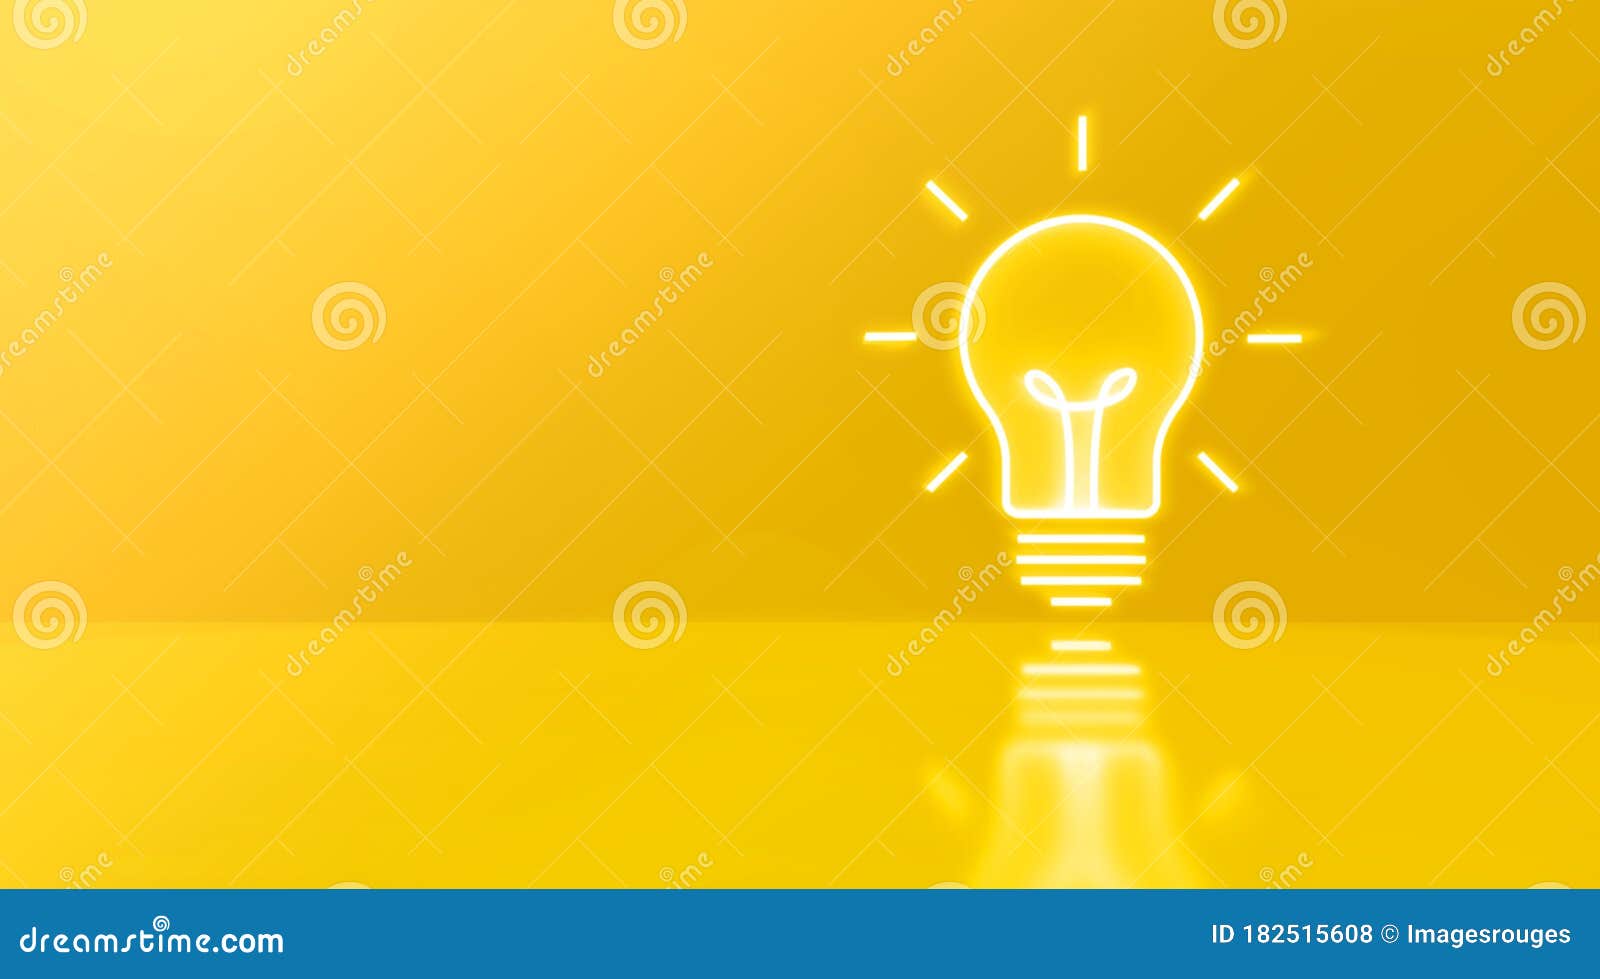 Ideas Concepts with Lightbulb in Neon Yellow Colorful Background.  Creativity Inspiration Stock Illustration - Illustration of efficient, idea:  182515608